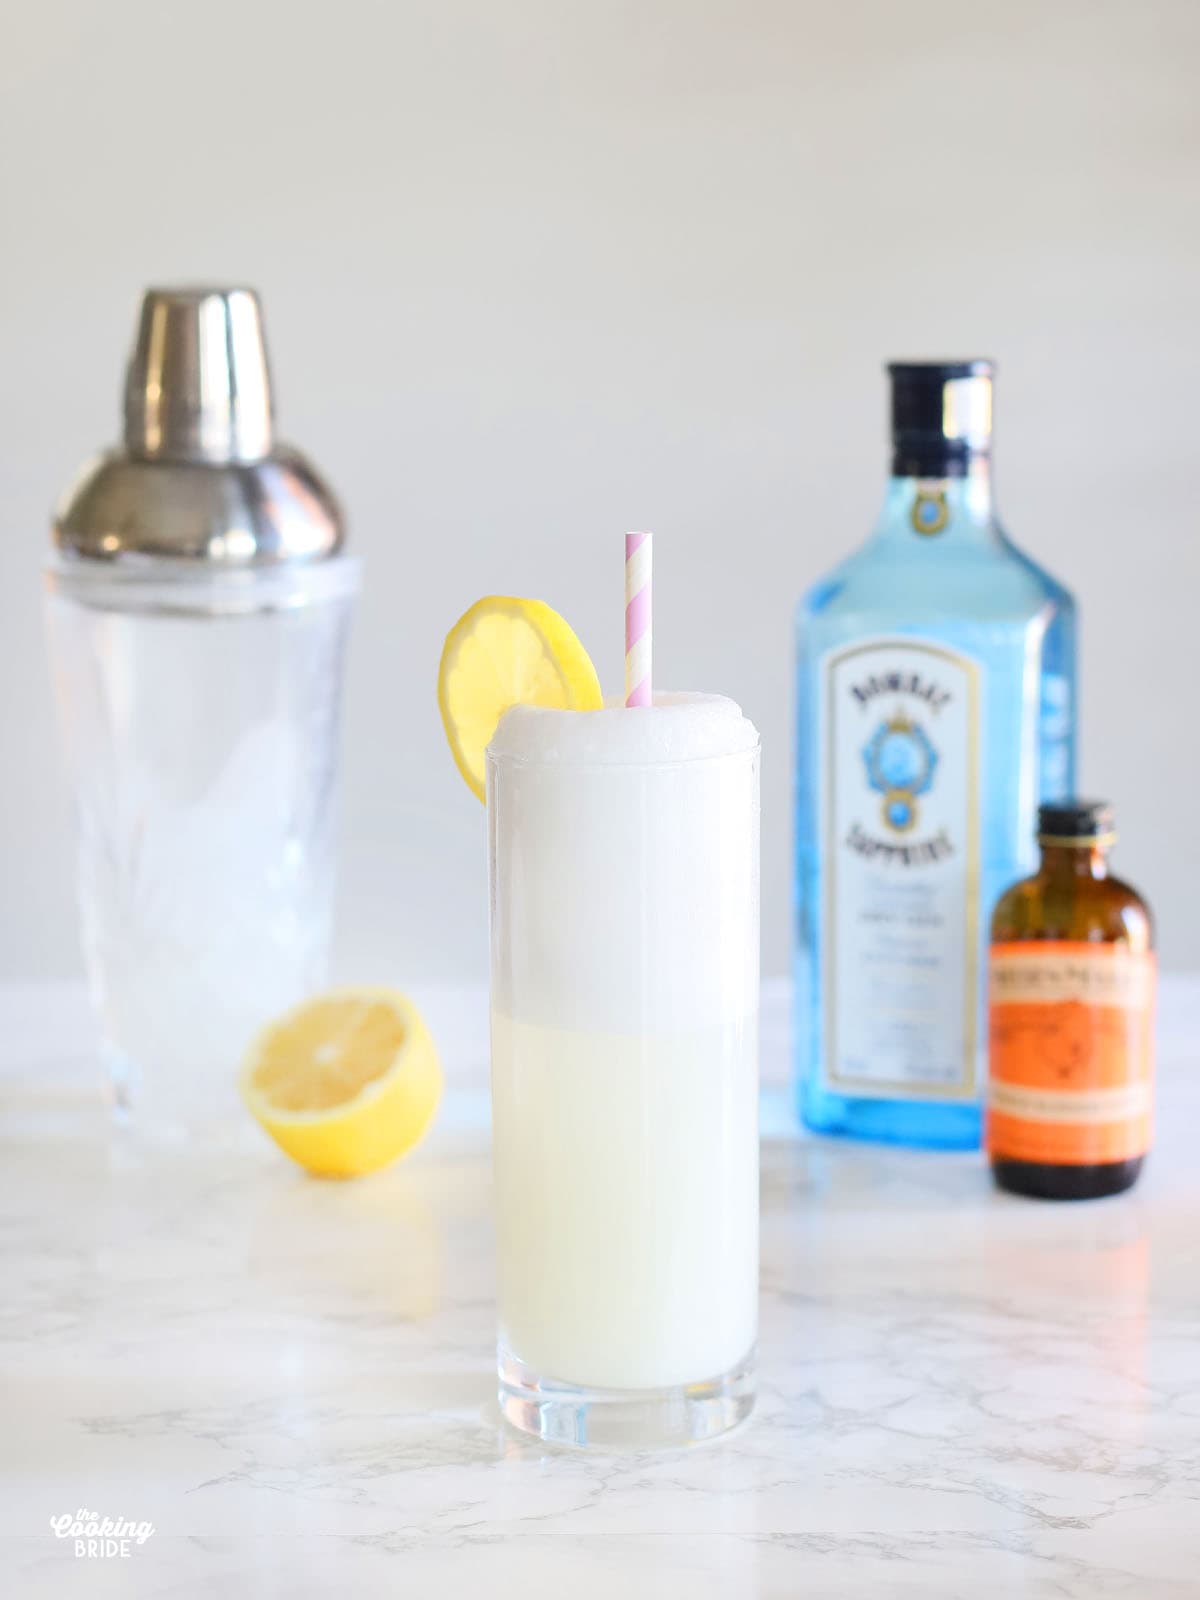 Ramos gin fizz garnished with a lemon slice and a straw on a marble table top